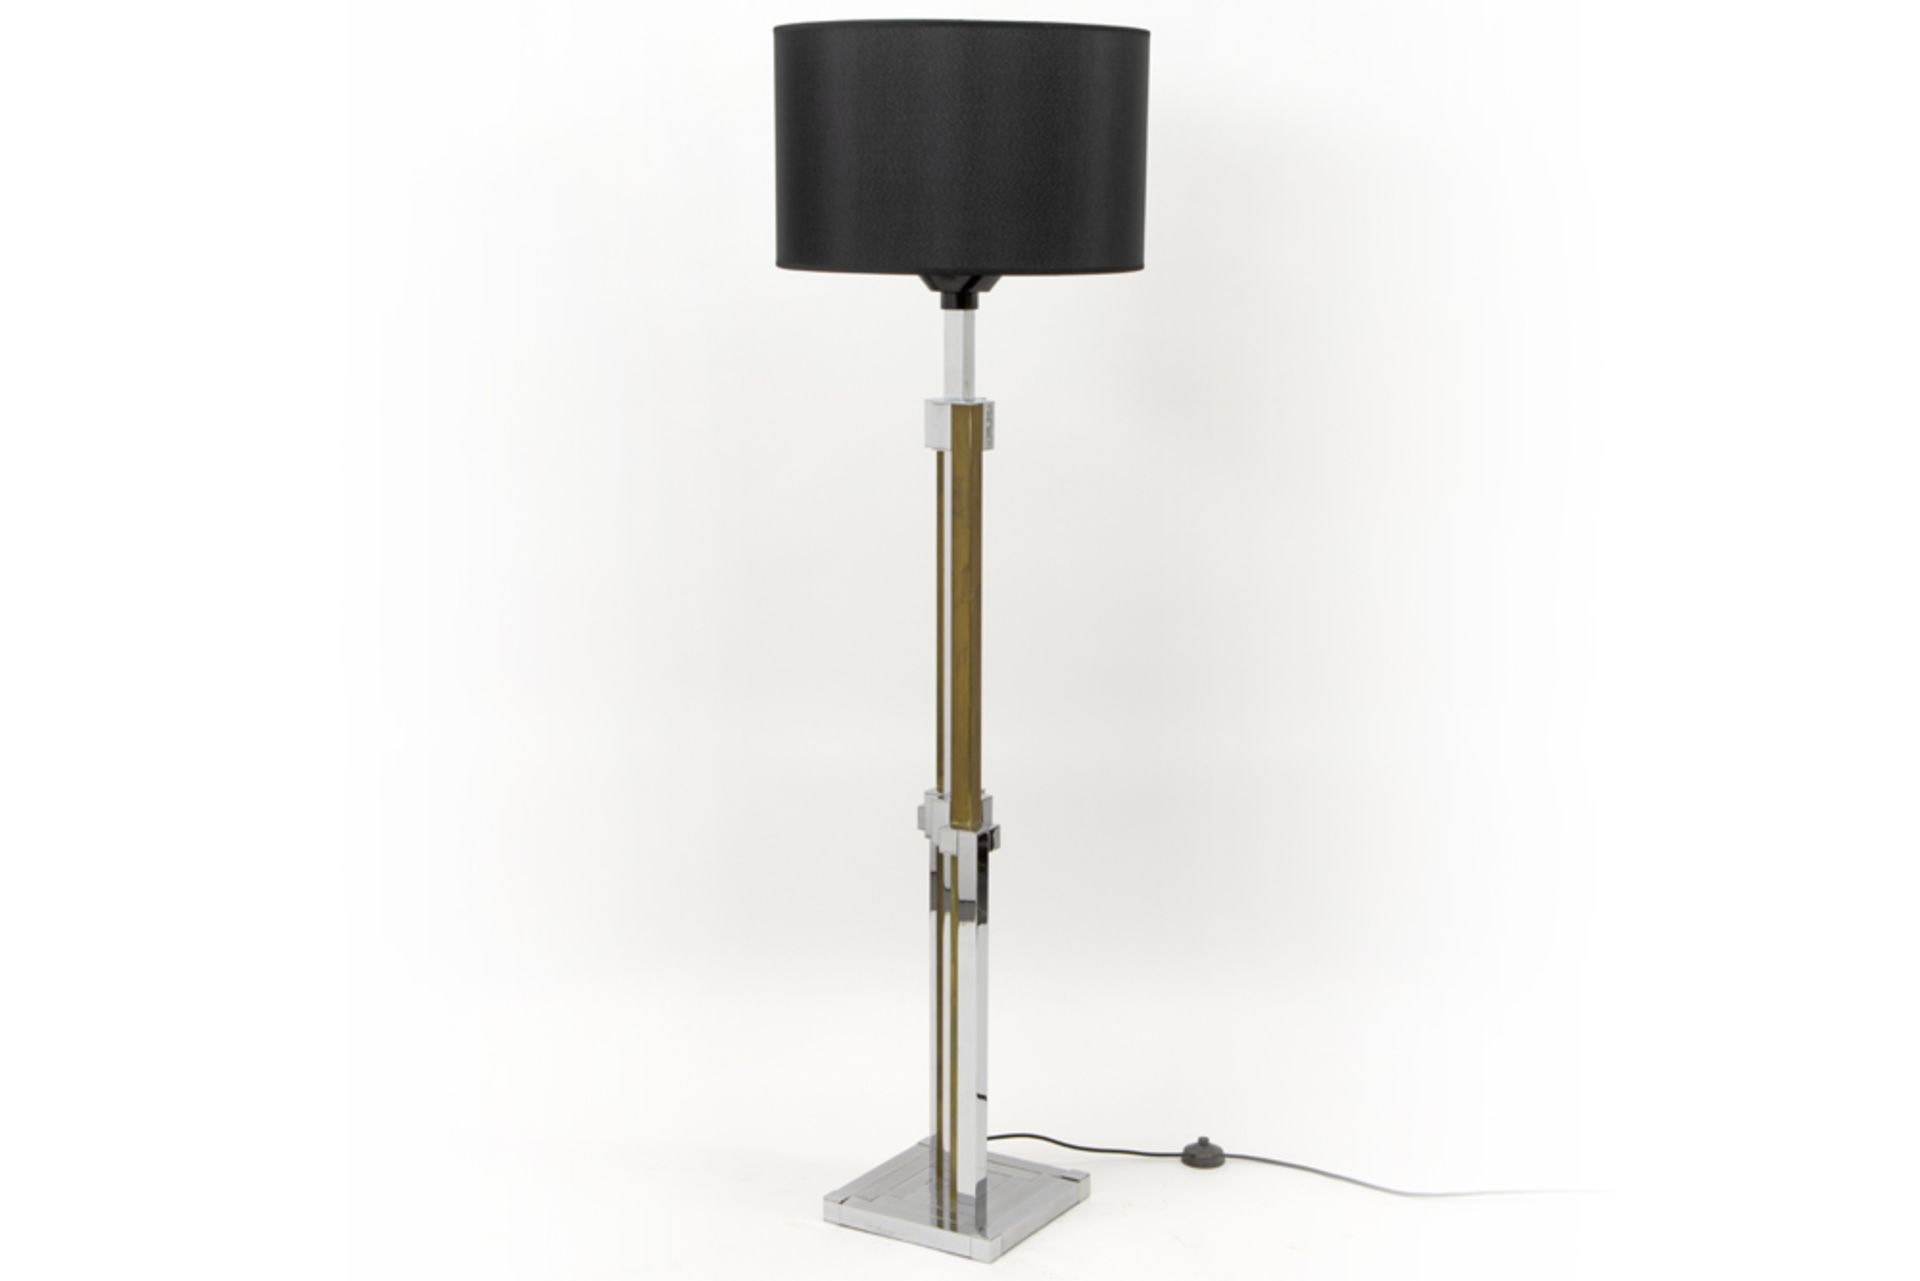 seventies' BD Lumica (Barcelona) marked floor lamp in chromed metal - with its shade||BD LUMICA - - Bild 2 aus 3